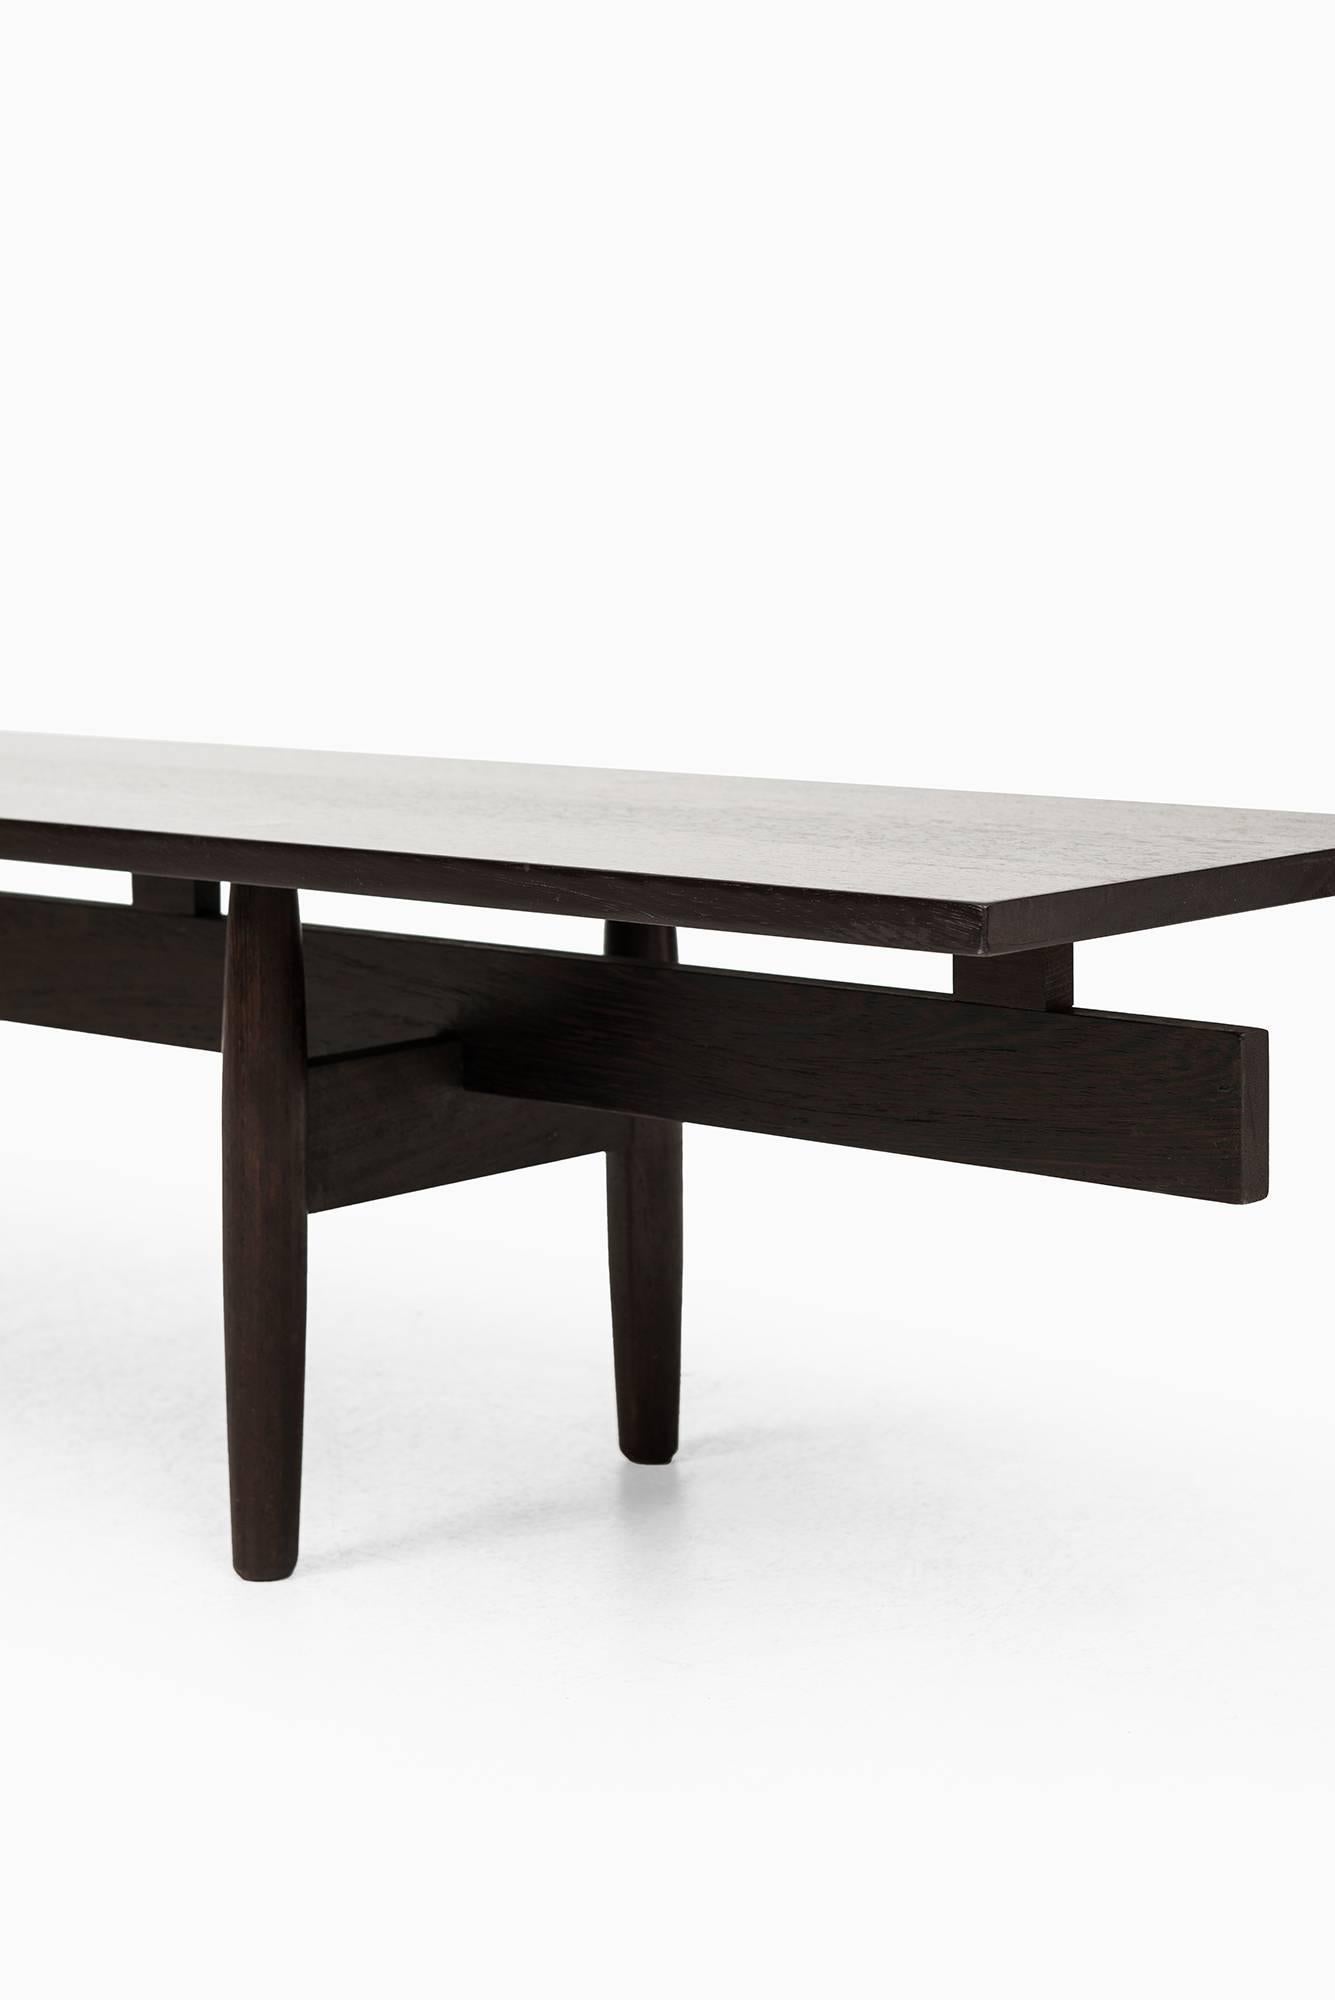 Very rare bench “Long Banc” designed by Ib Kofod-Larsen. Produced in Denmark.